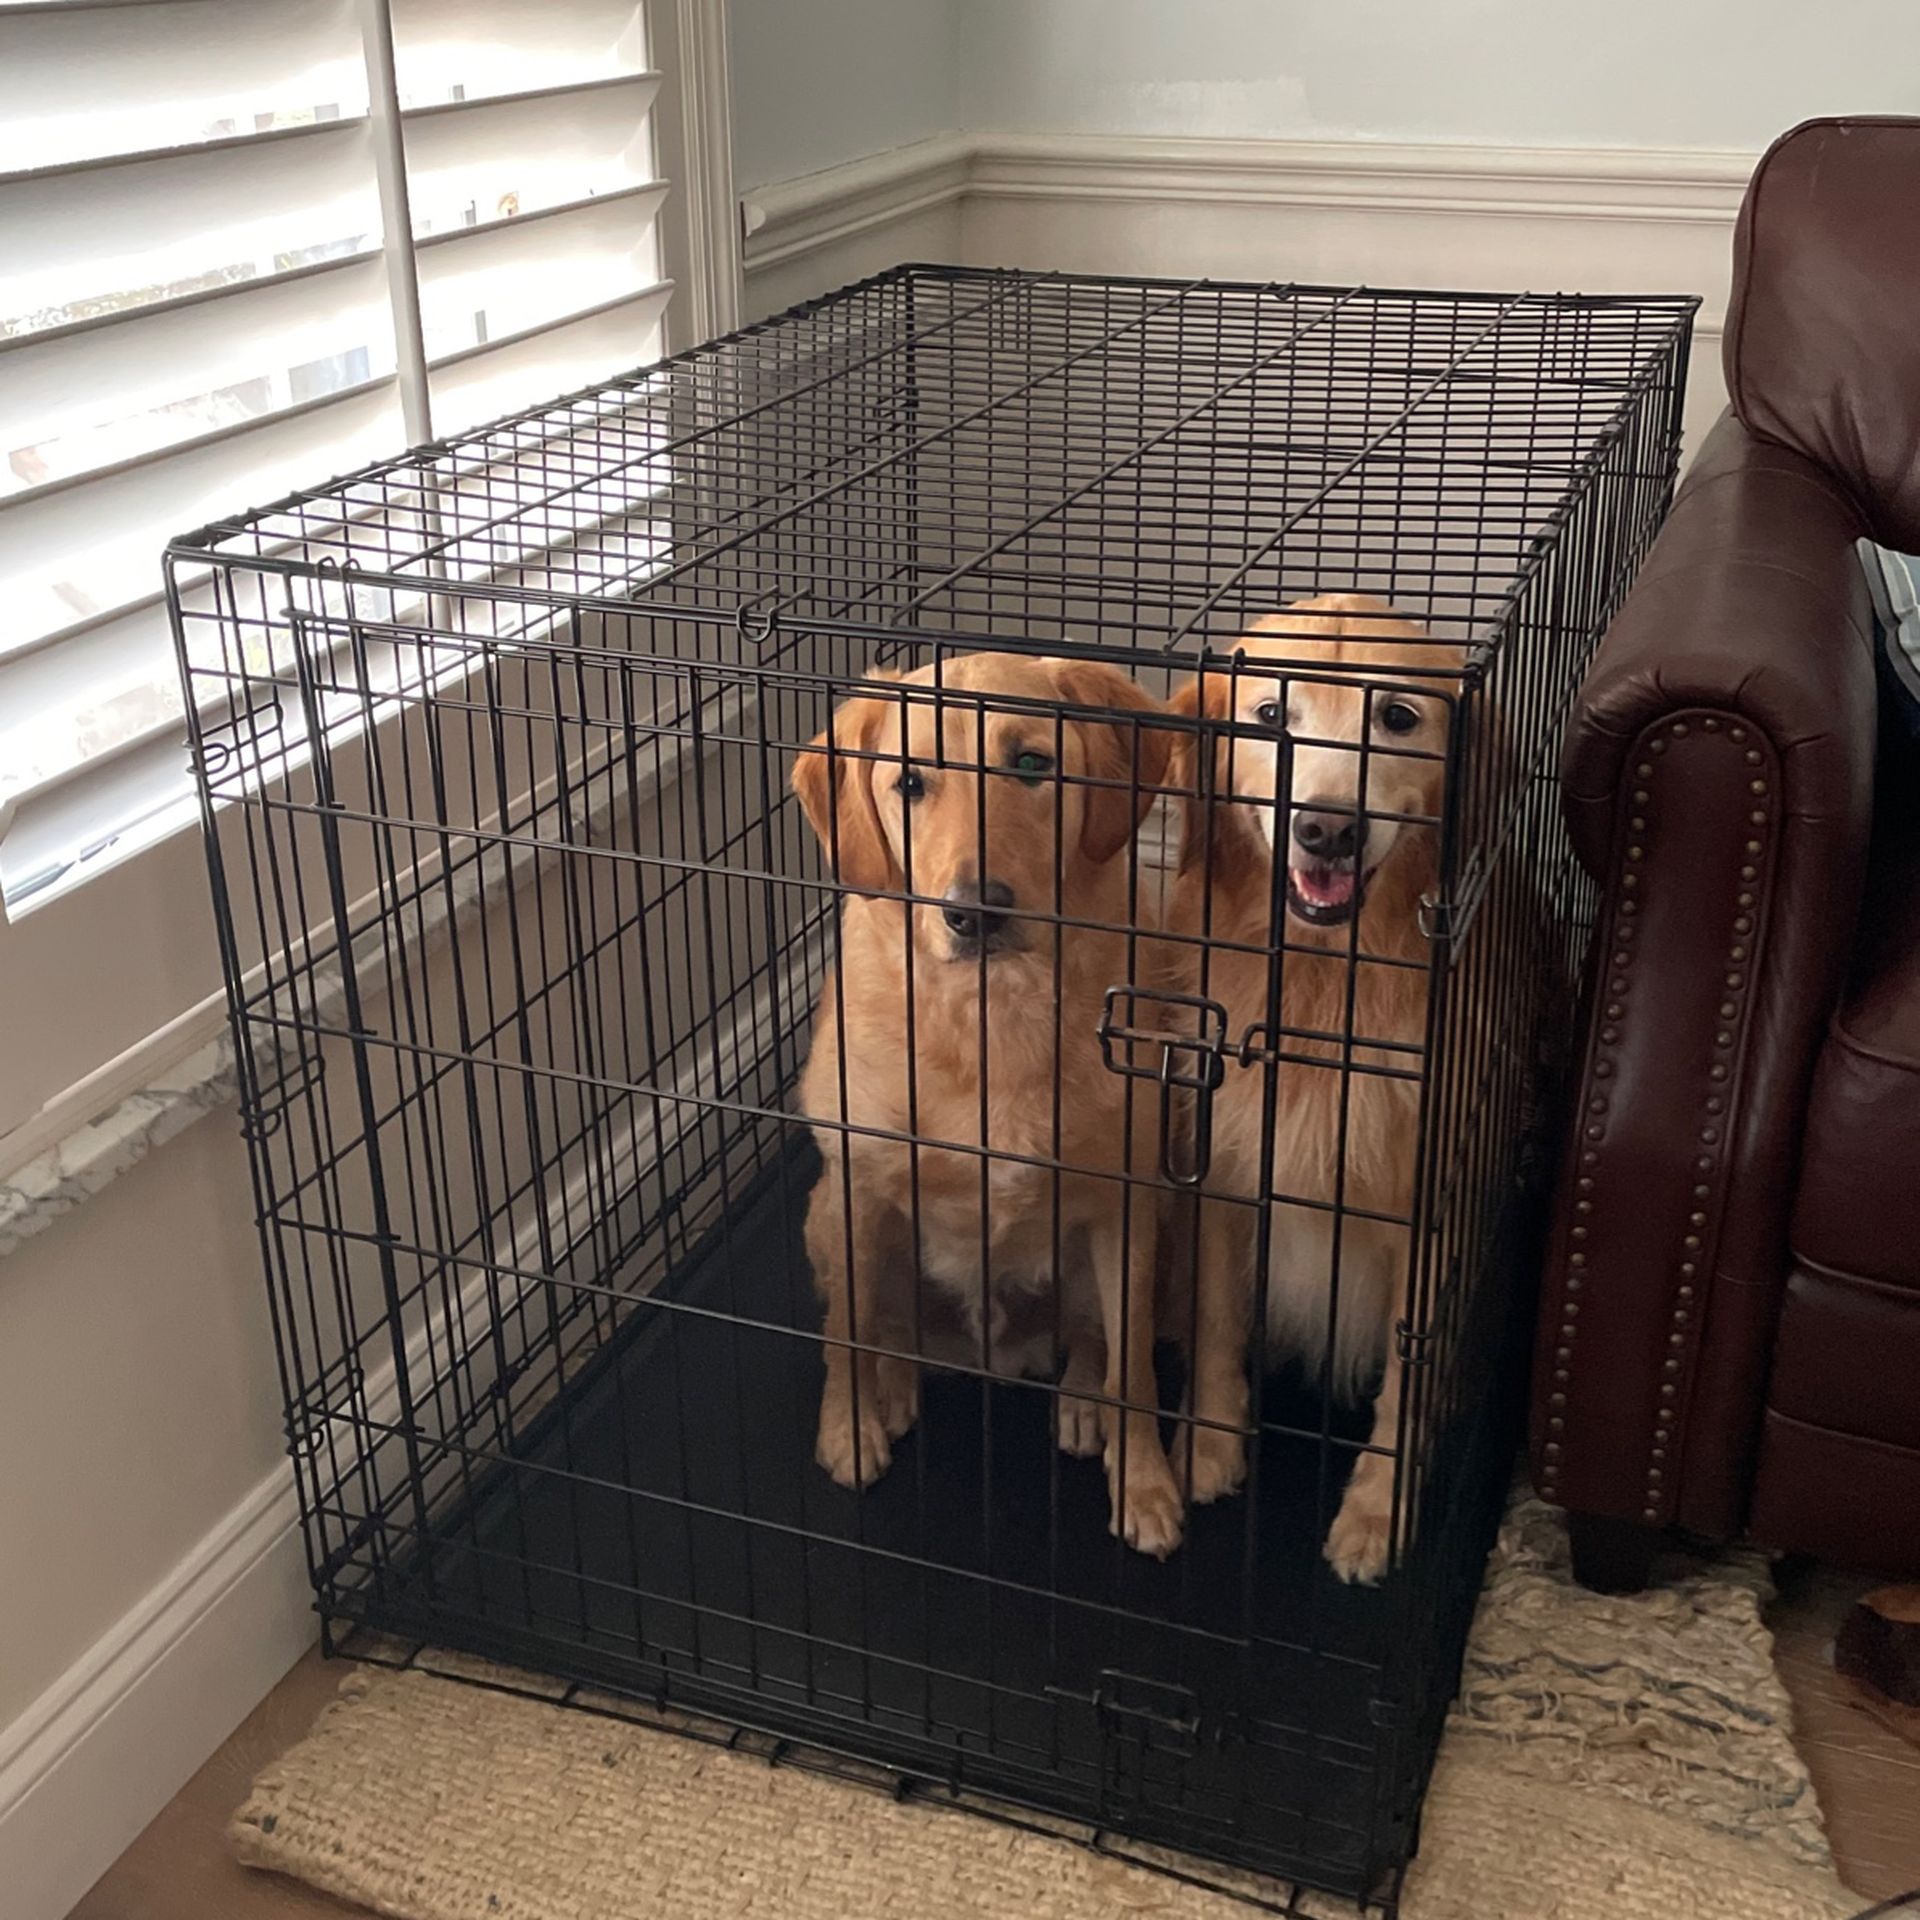 XL Dog Crate/kennel